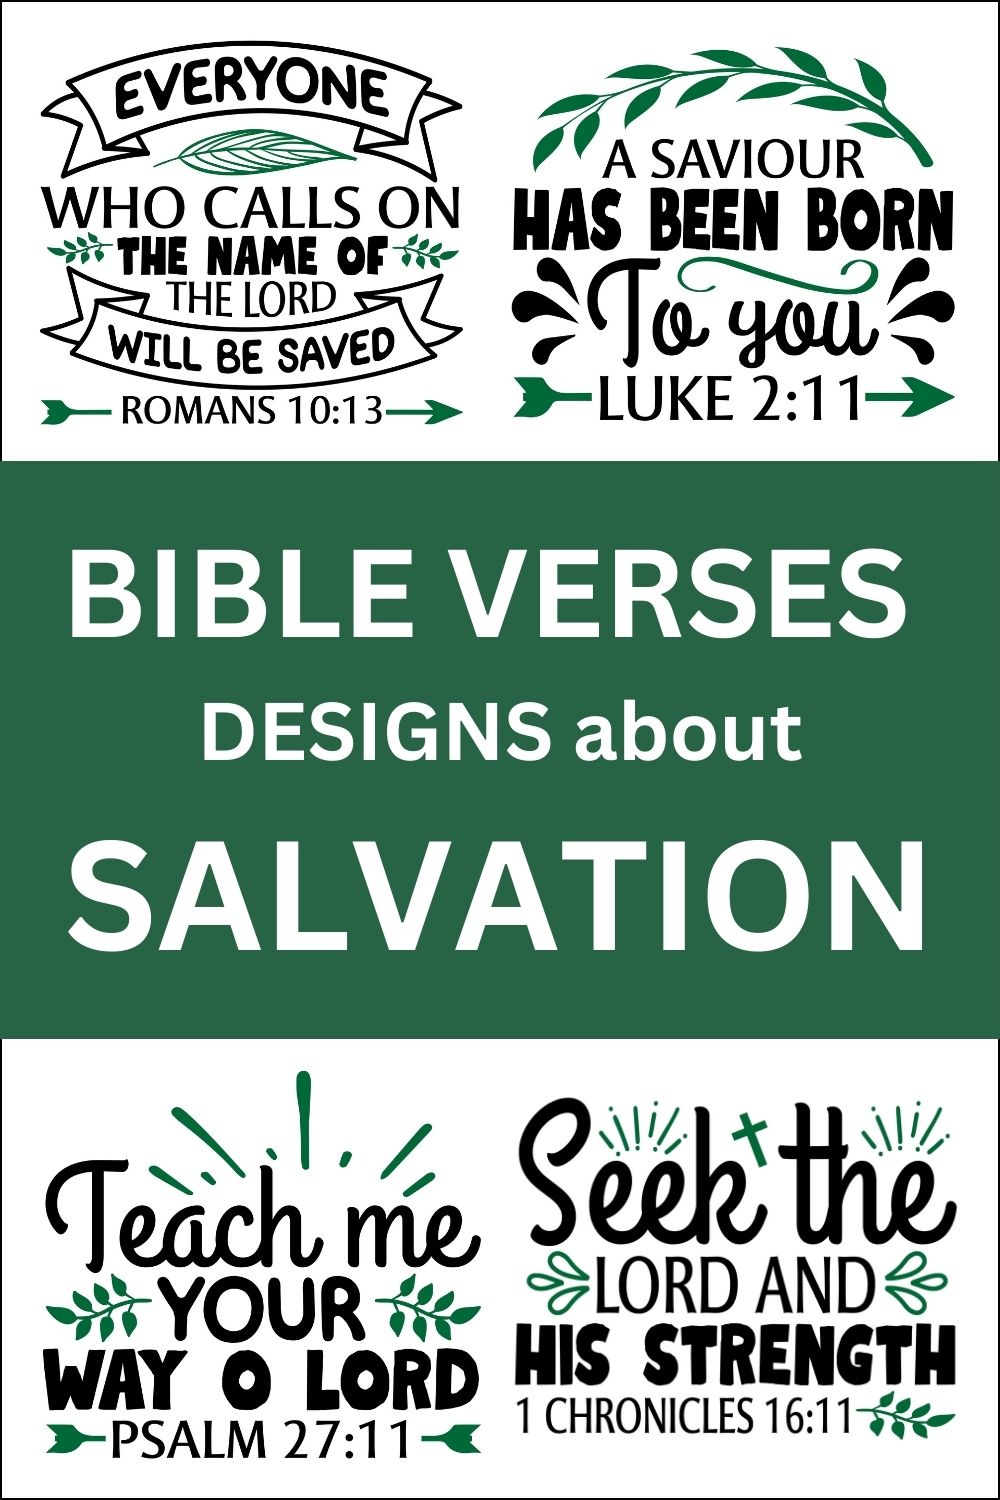 Free printable bundle of Bible Verses about Salvation, scripture passages, Cricut designs, DIY patterns, svg files, templates, clip art, stencils, silhouette, embroidery, cut files, design space, vector, crafts, laser cutting, and DIY crafts.